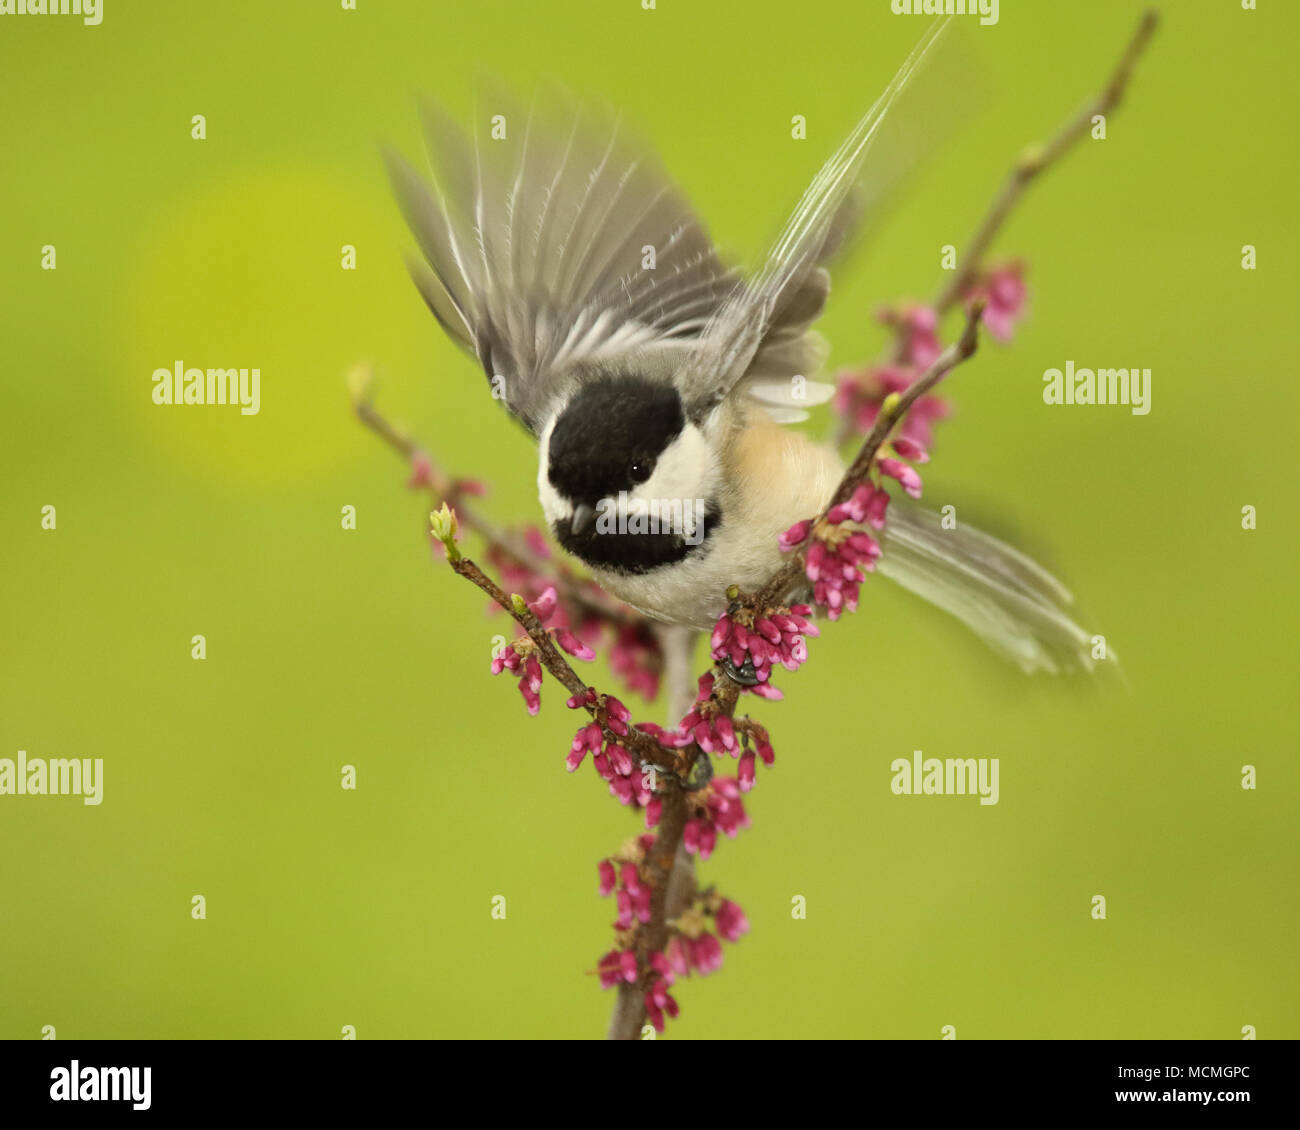 A Black-capped Chickadee fluttering among Redbud blossoms. Stock Photo